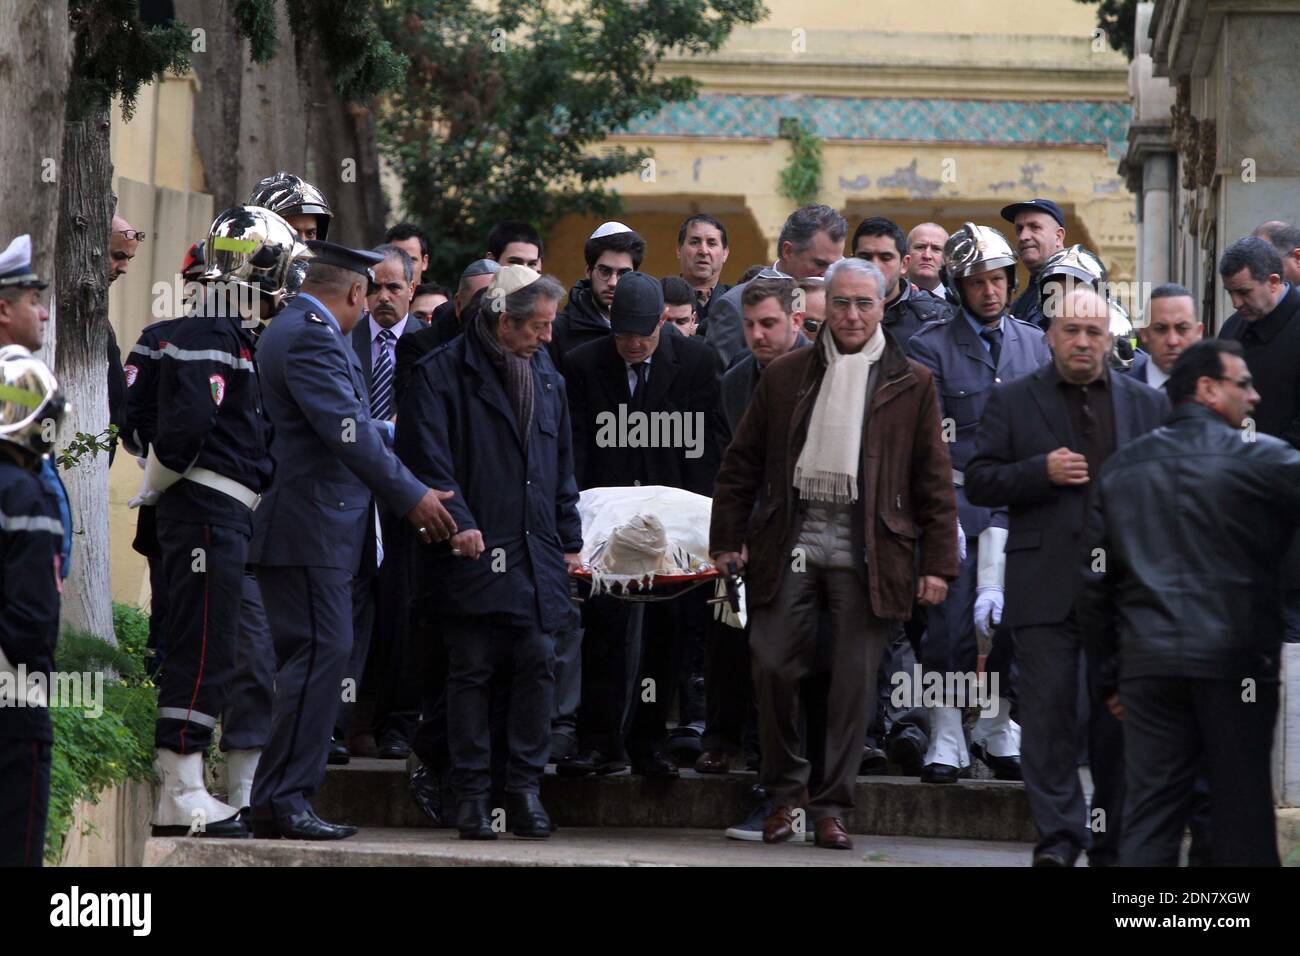 Mourners and relatives, including film director Alexandre Arcady (2ndR), follow the body of French actor Roger Hanin during his funeral at St Eugene Jewish cemetary in the Algerian capital Algiers on February 13, 2015. Hanin, who died on February 11, 2015 in Paris, was best known for playing the title role in the 1989–2006 TV police drama, Navarro. Hanin had prepared his funeral before his death and asked the Algerian authorities to be buried in Algiers, his hometown and in the cemetary where his father rests. Photo by Bilal Bensalem/APP/ABACAPRESS.COM Stock Photo